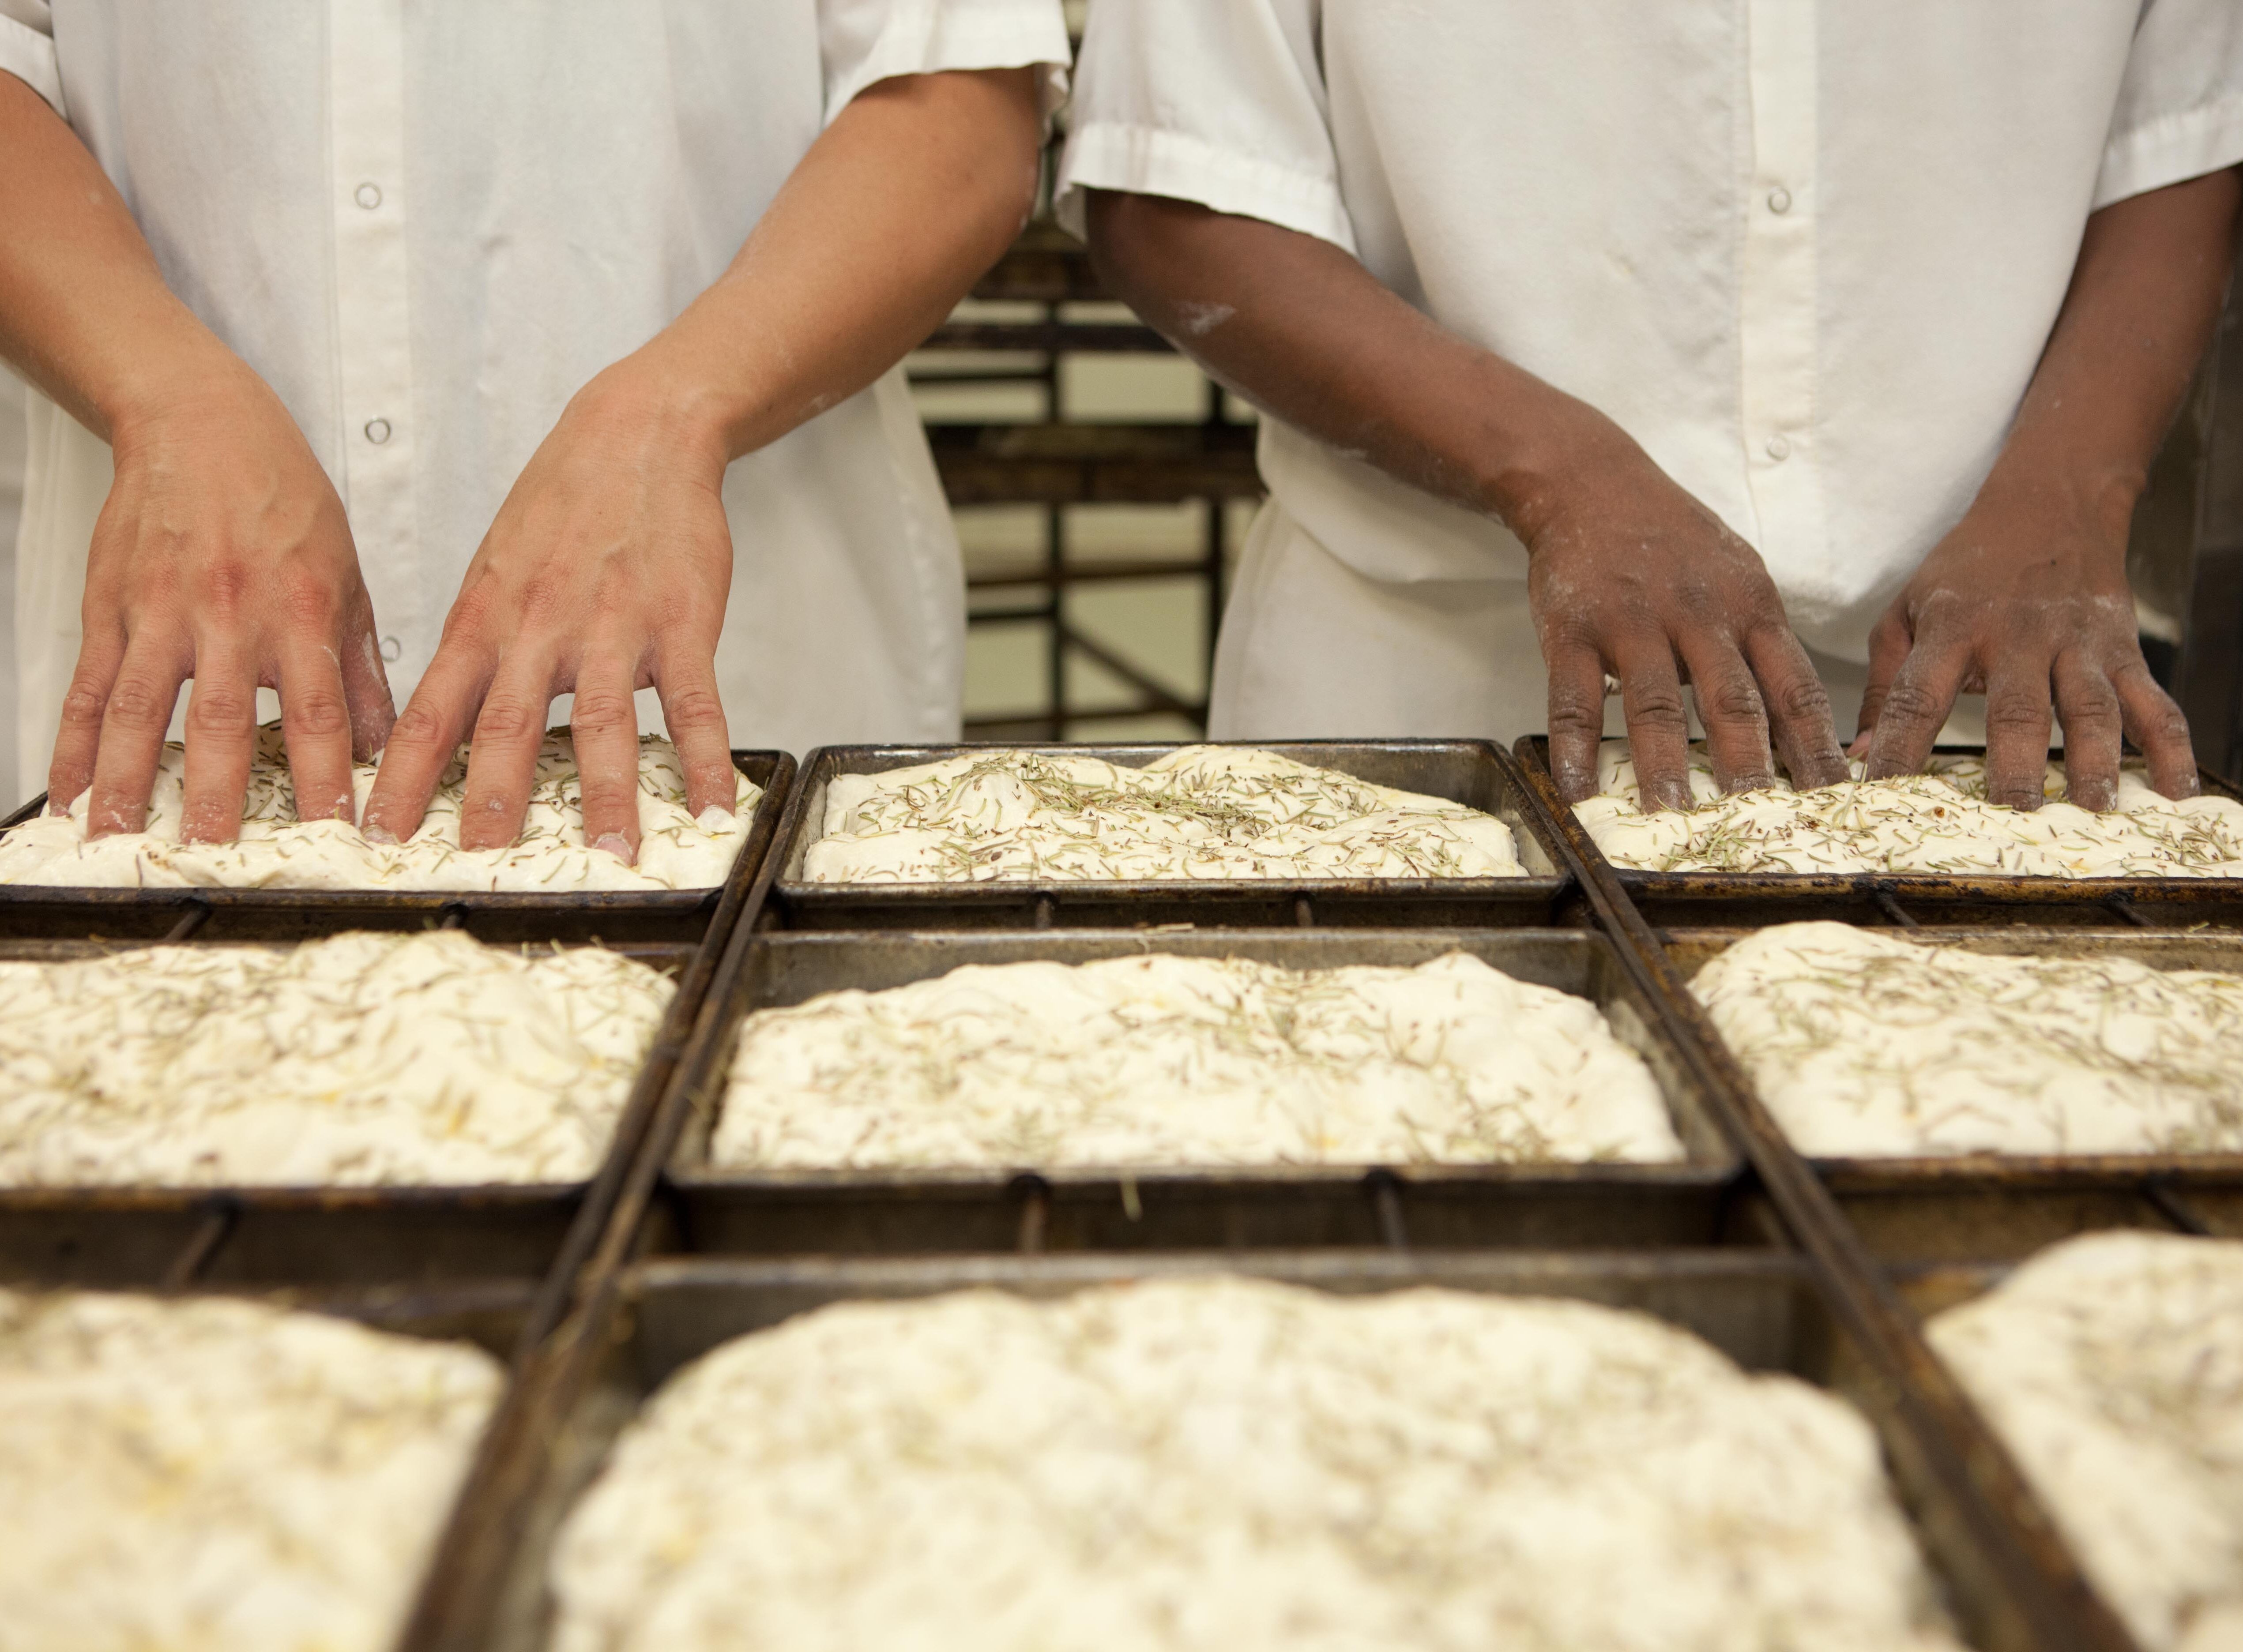 Foodservice Factory workers kneading dough. Clean label, simple ingredients, artisan quality, menu inspiration.